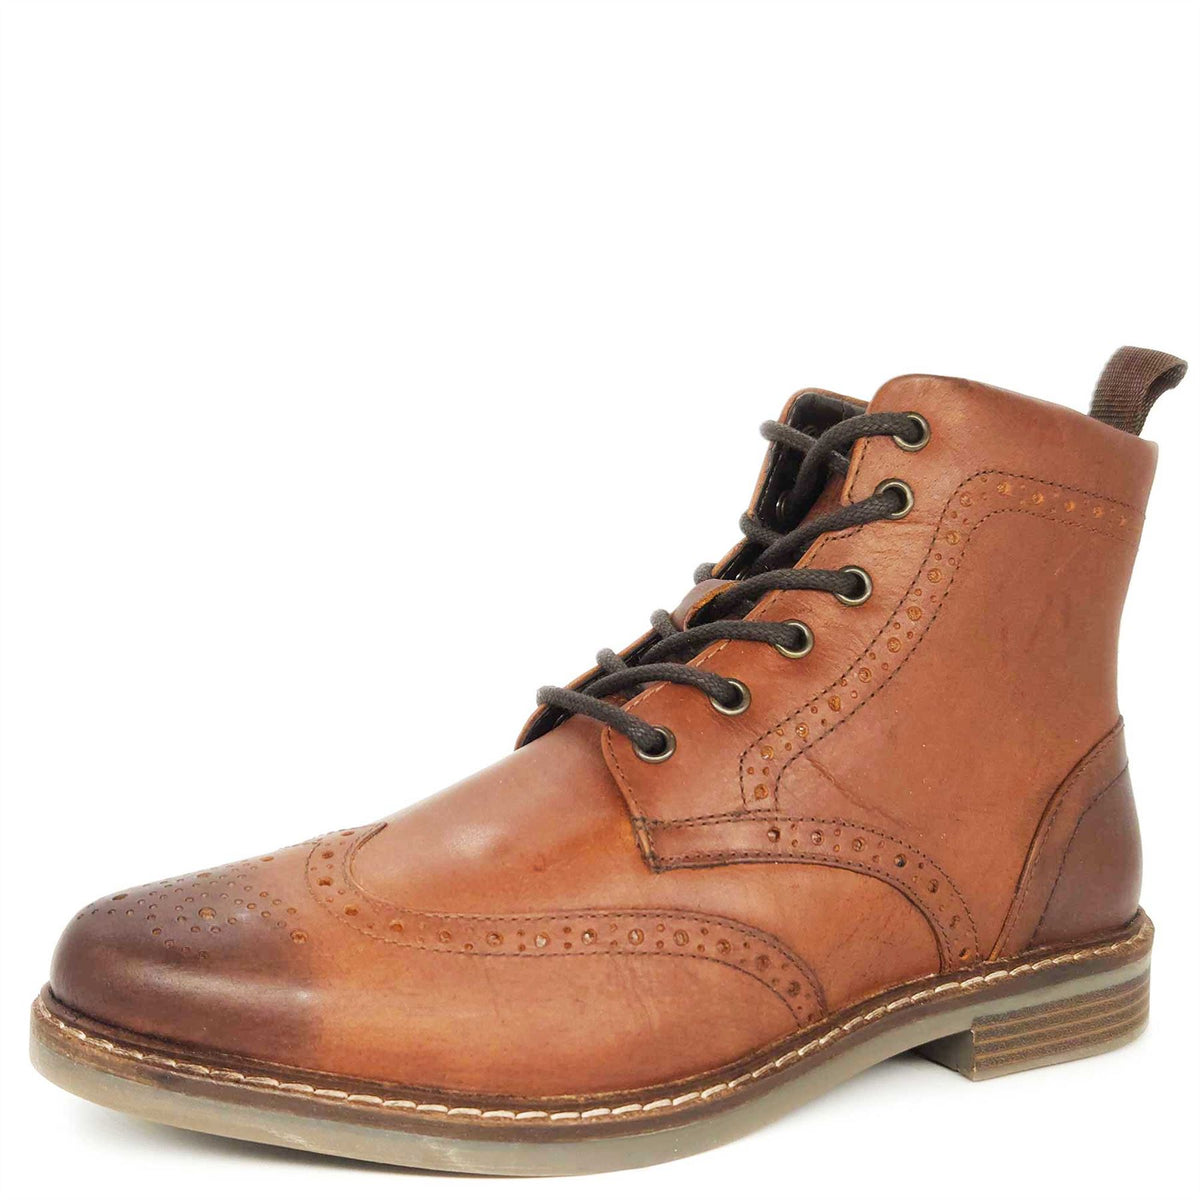 Red Tape Crick Dixon Leather Brogue Lace Up Mens Casual Boots